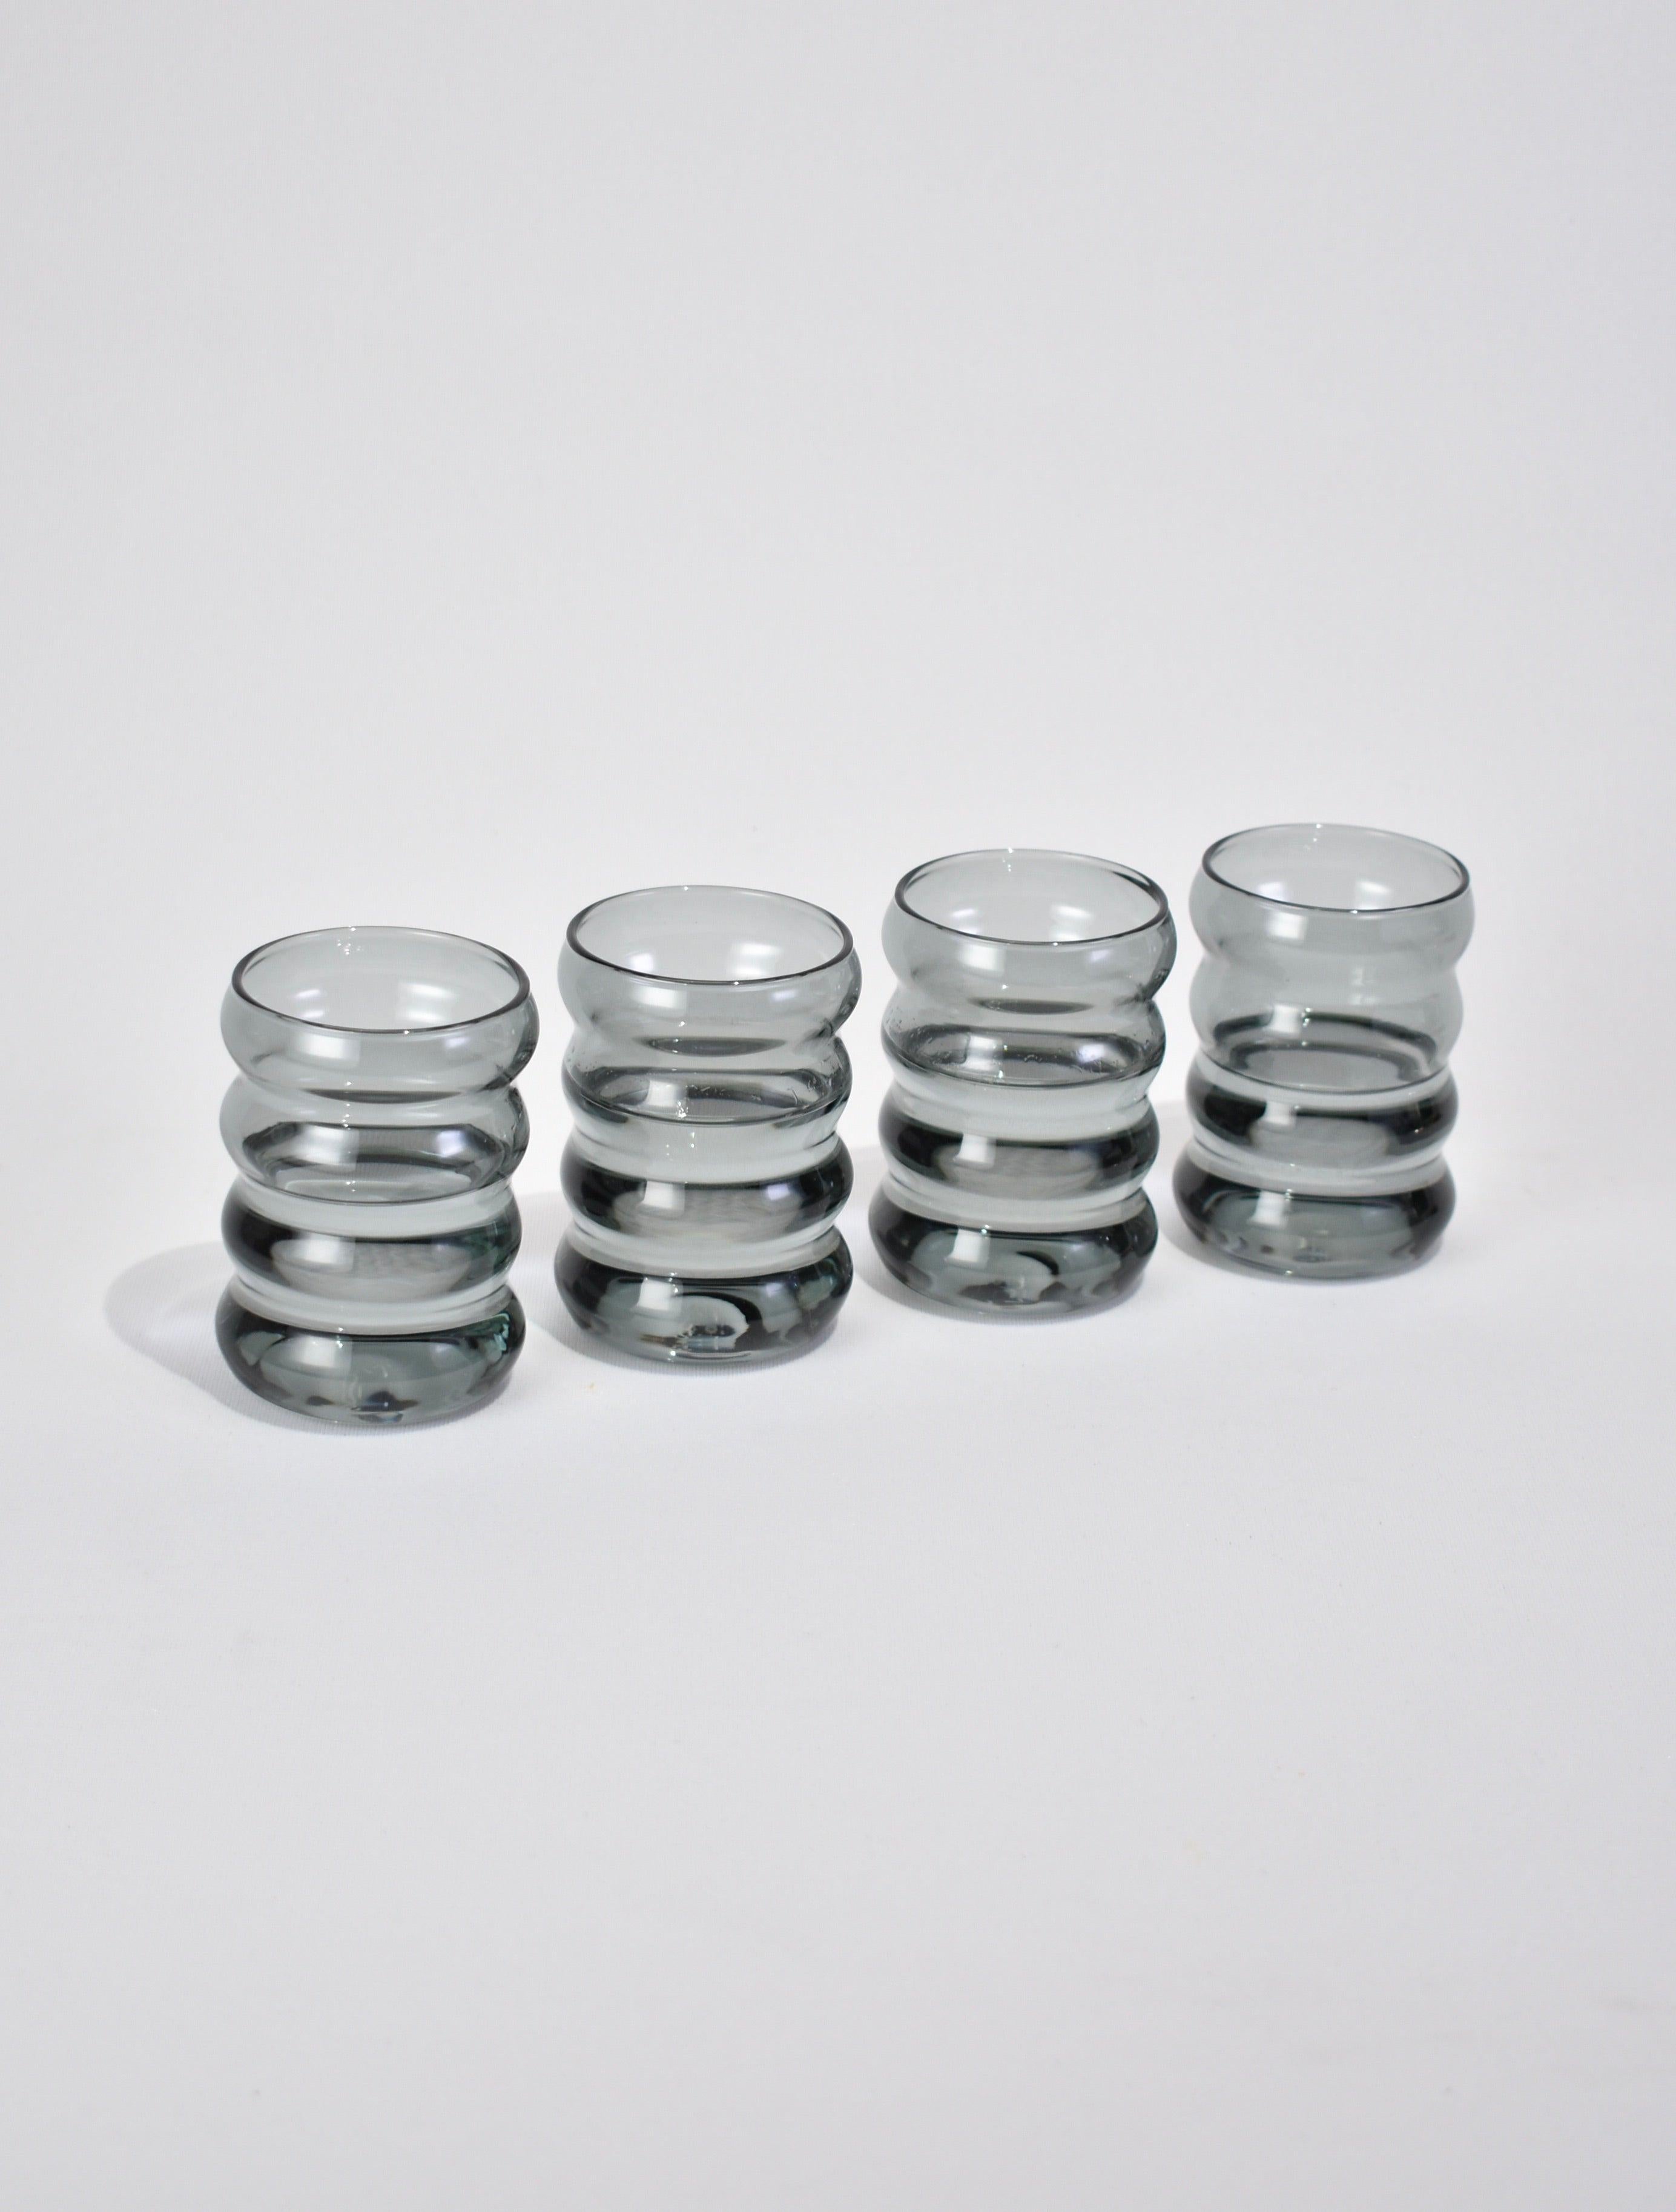 Wavy glass drinking cup set of four in grey. Perfect size for water, wine, juice or spirits. Designed by Sophie Lou Jacobsen in New York.

Made of lightweight and durable borosilicate glass. Cups are heat and cold resistant, and dishwasher safe.